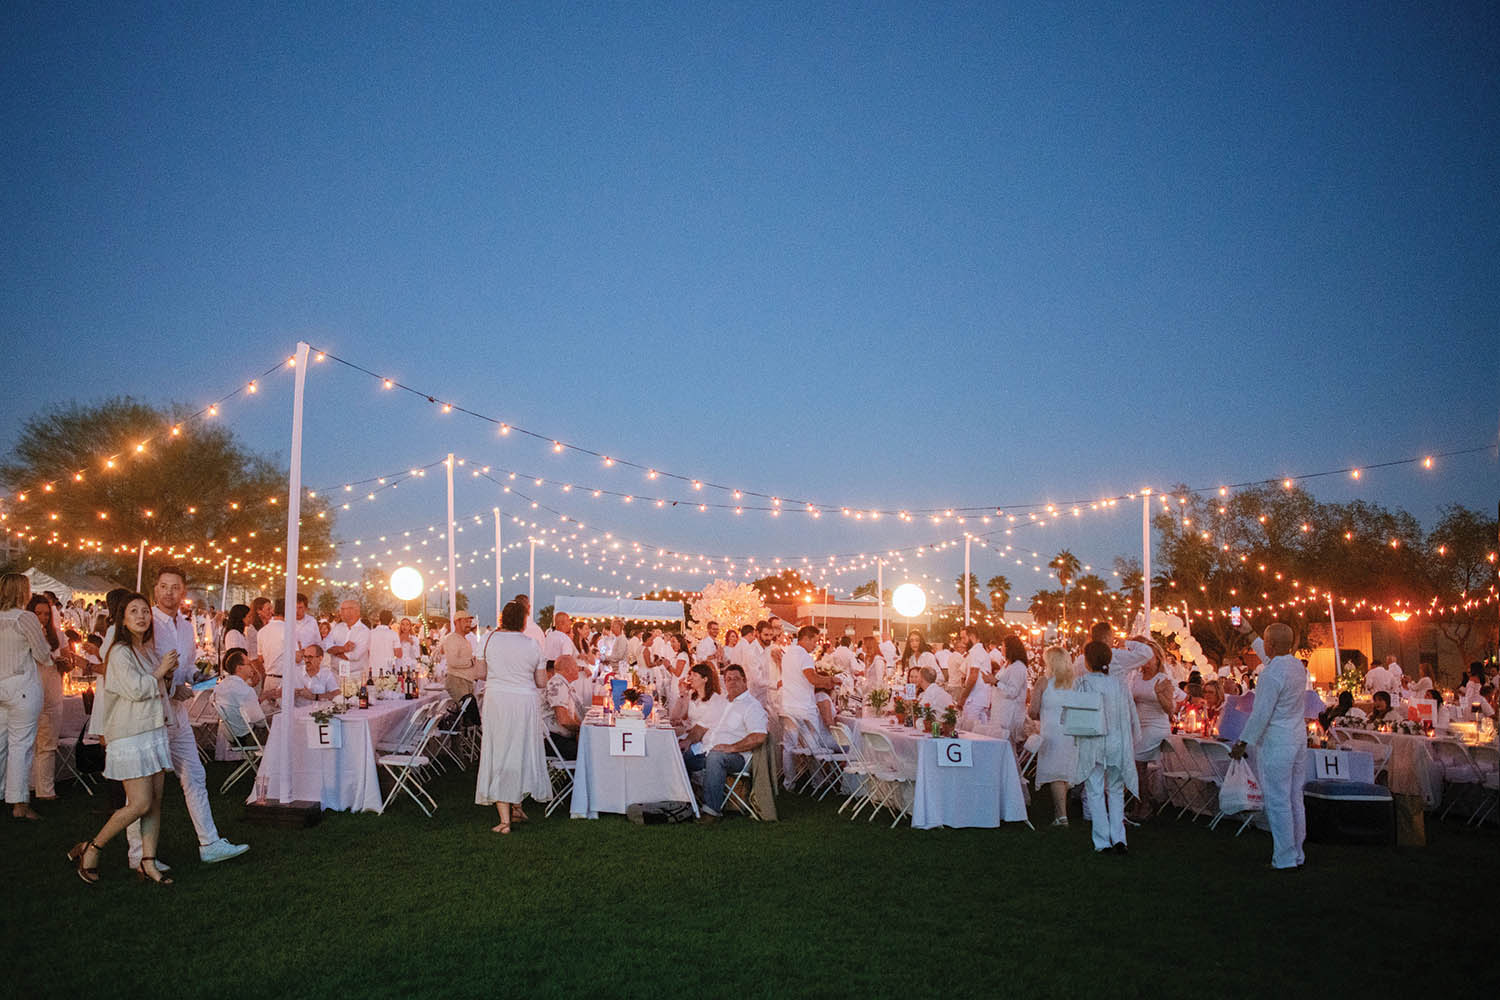 Dine under the stars to support Hance Park